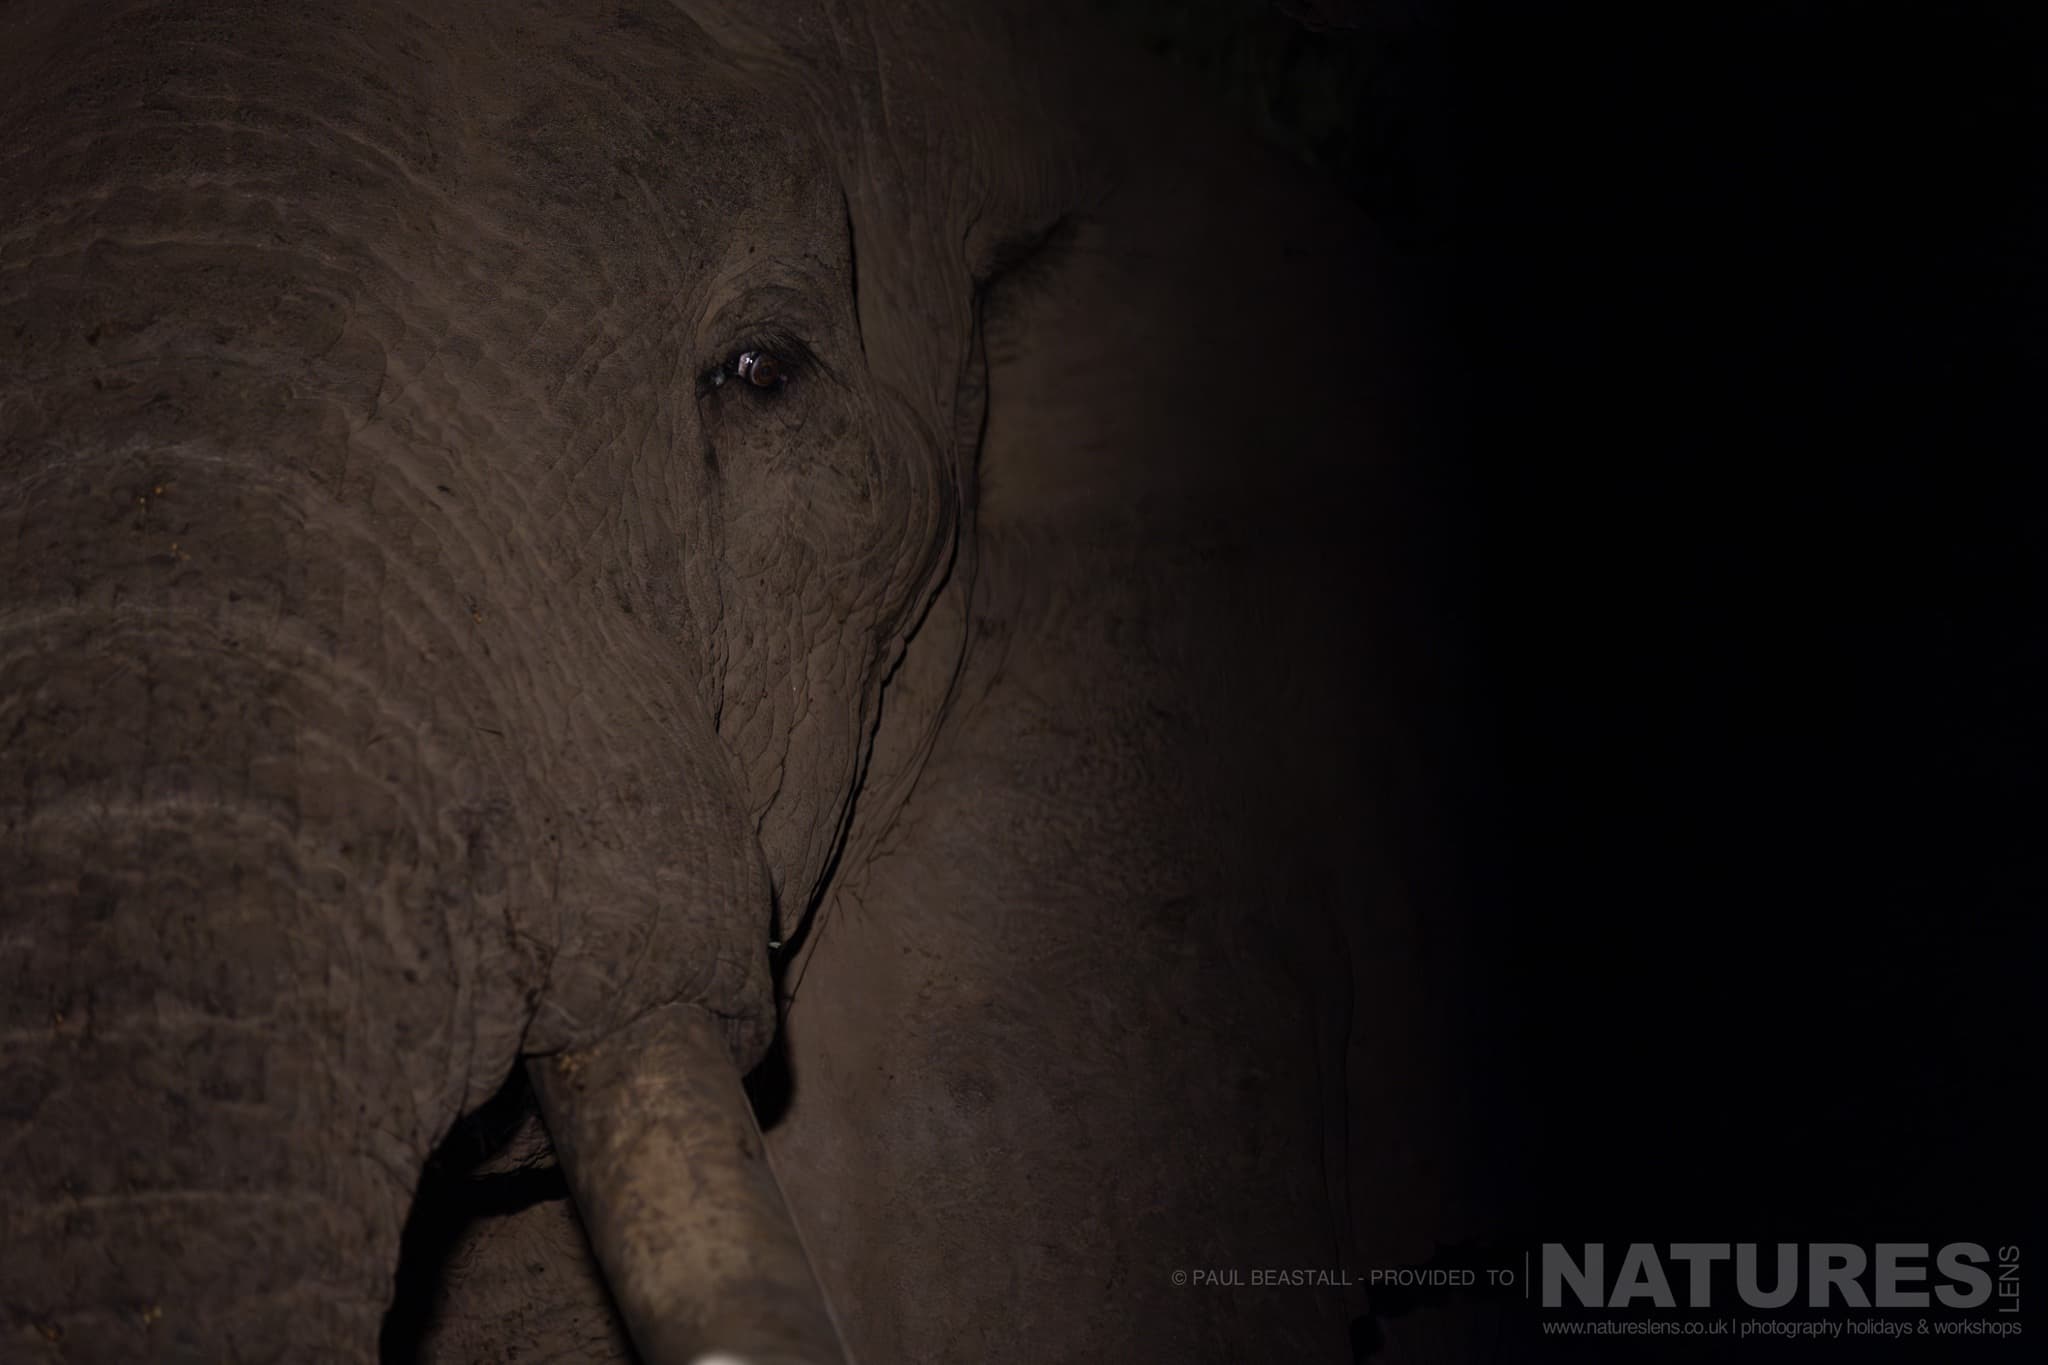 An Elephant Who Visited The Waterhole At Night Photographed By Paul Beastall During A Photography Holiday In The Southern Great Rift Valley With Natureslens